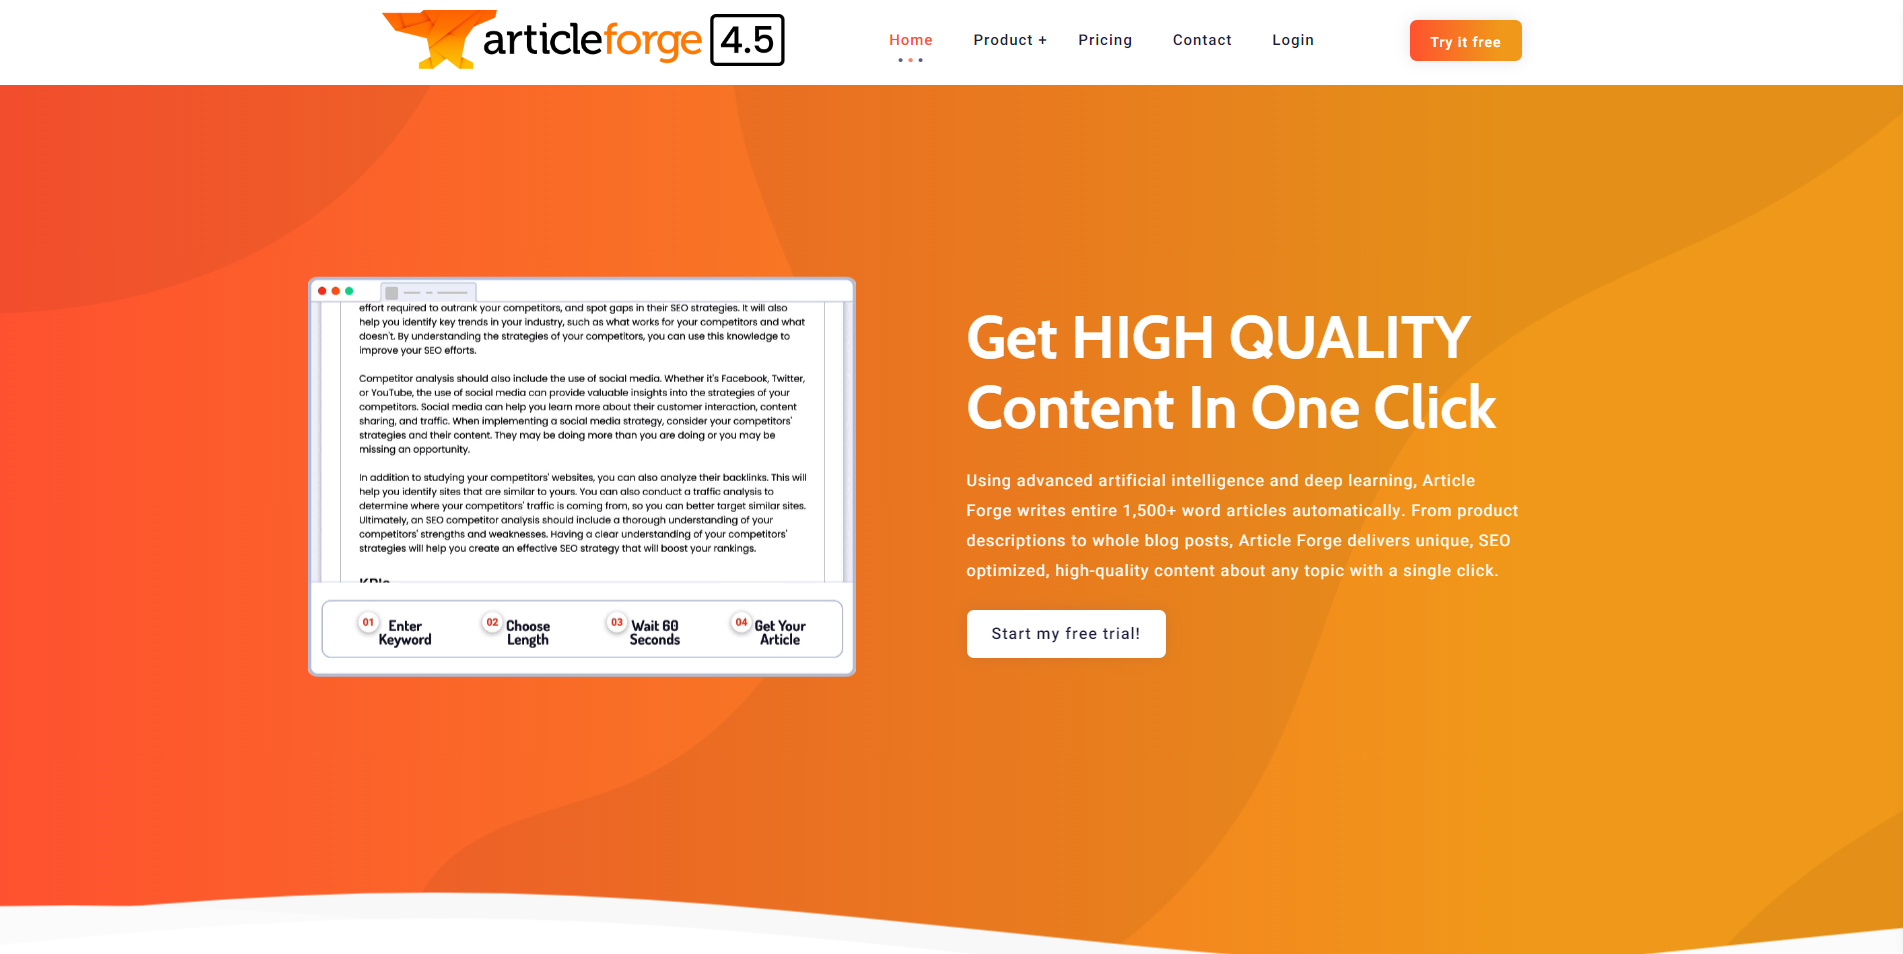 Article forge